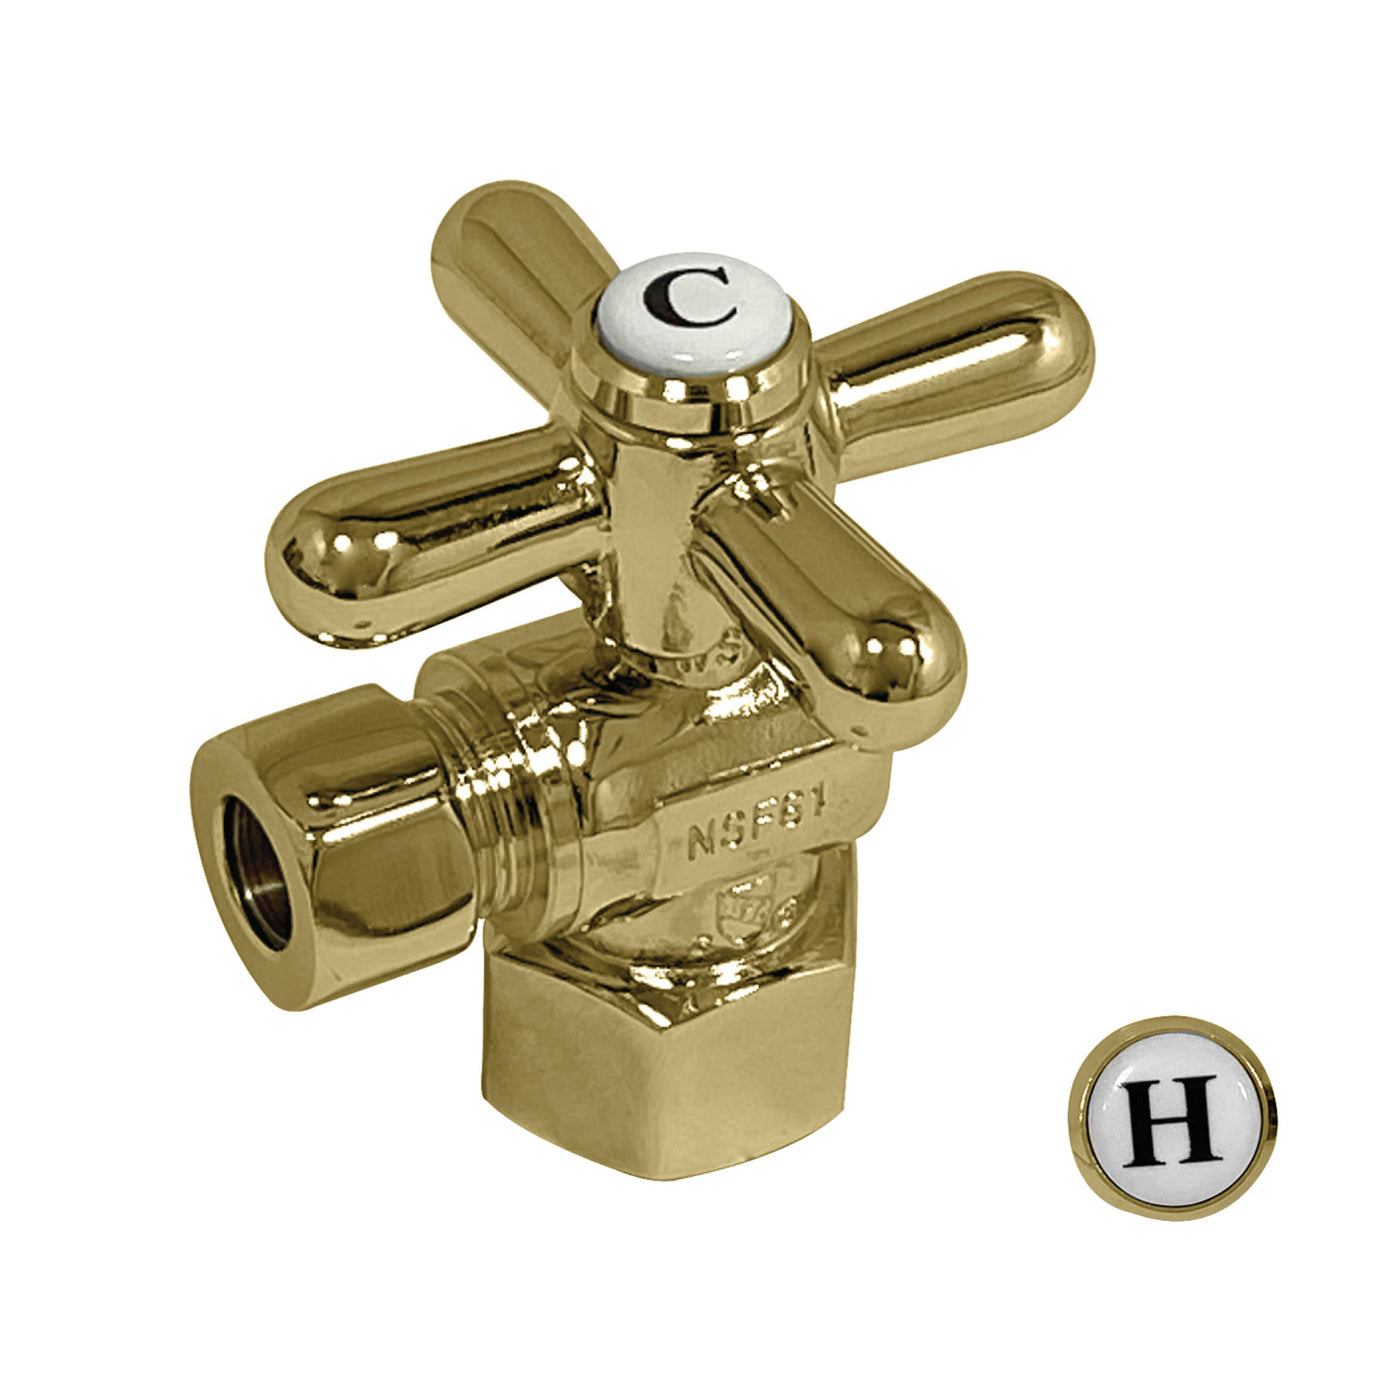 Elements of Design ECC43102X 1/2-Inch FIP x 3/8-Inch OD Comp Quarter-Turn Angle Stop Valve, Polished Brass